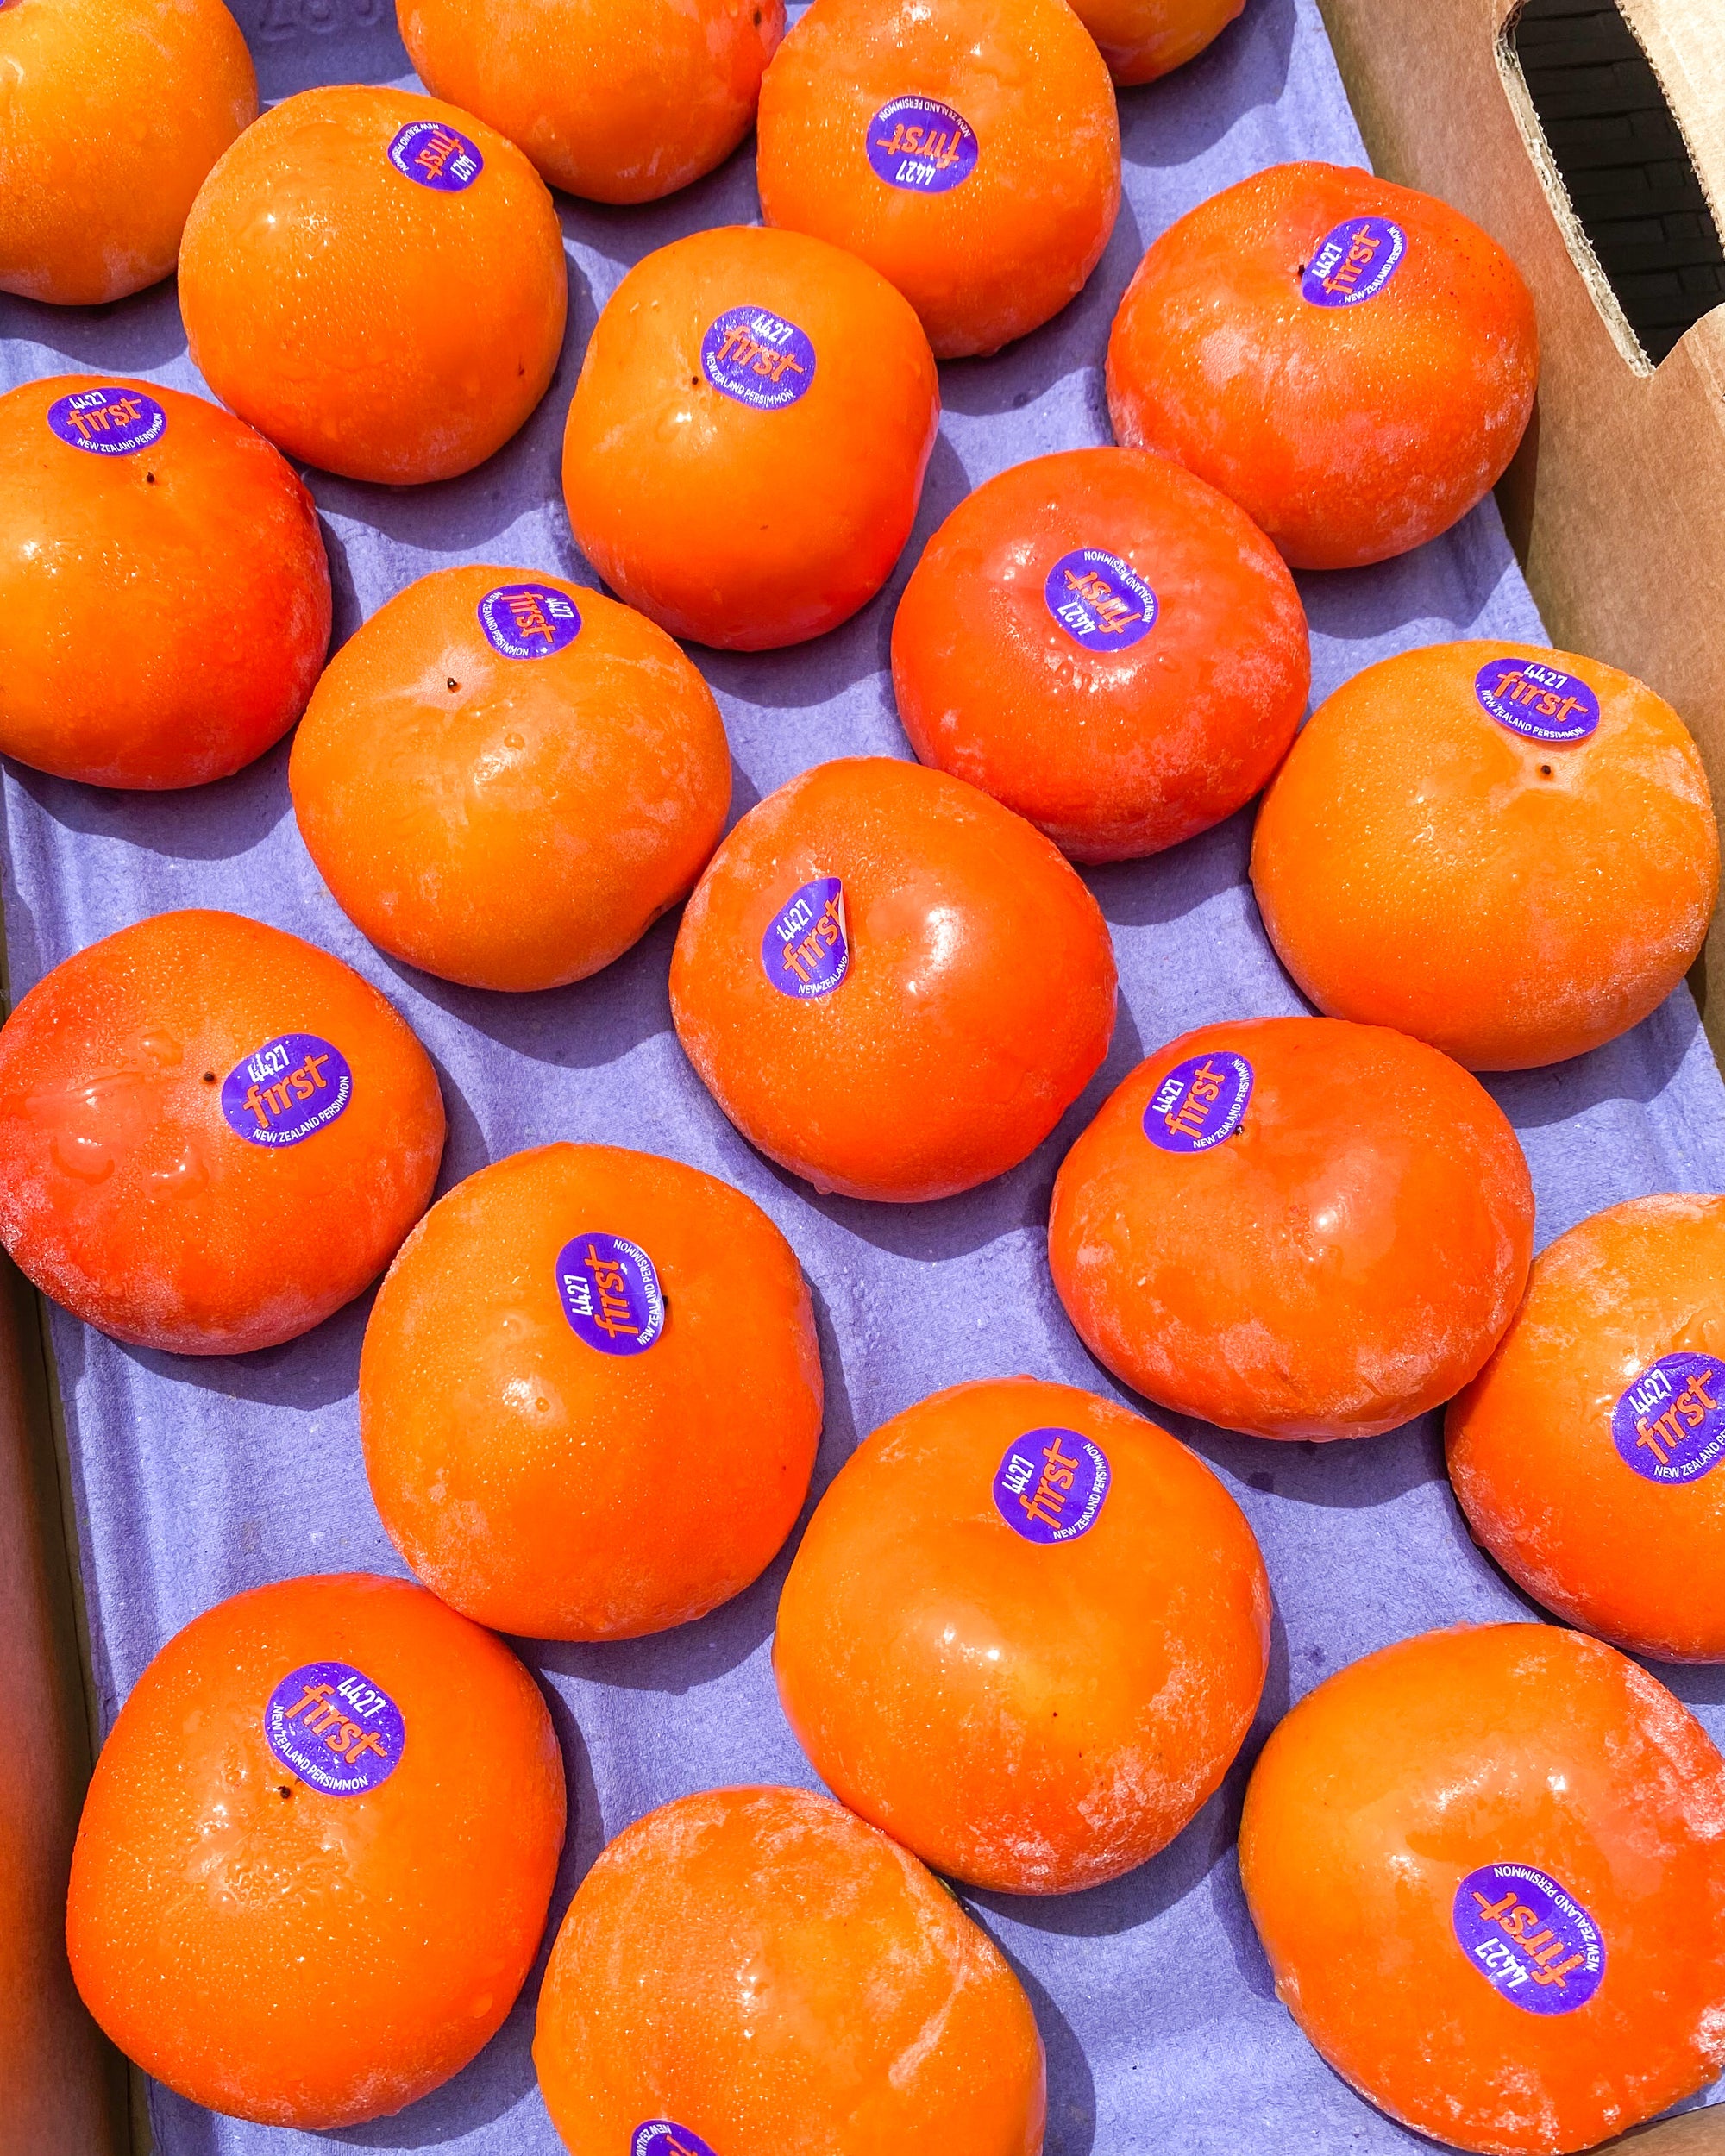 NZ Persimmons 5 + 1 FREE